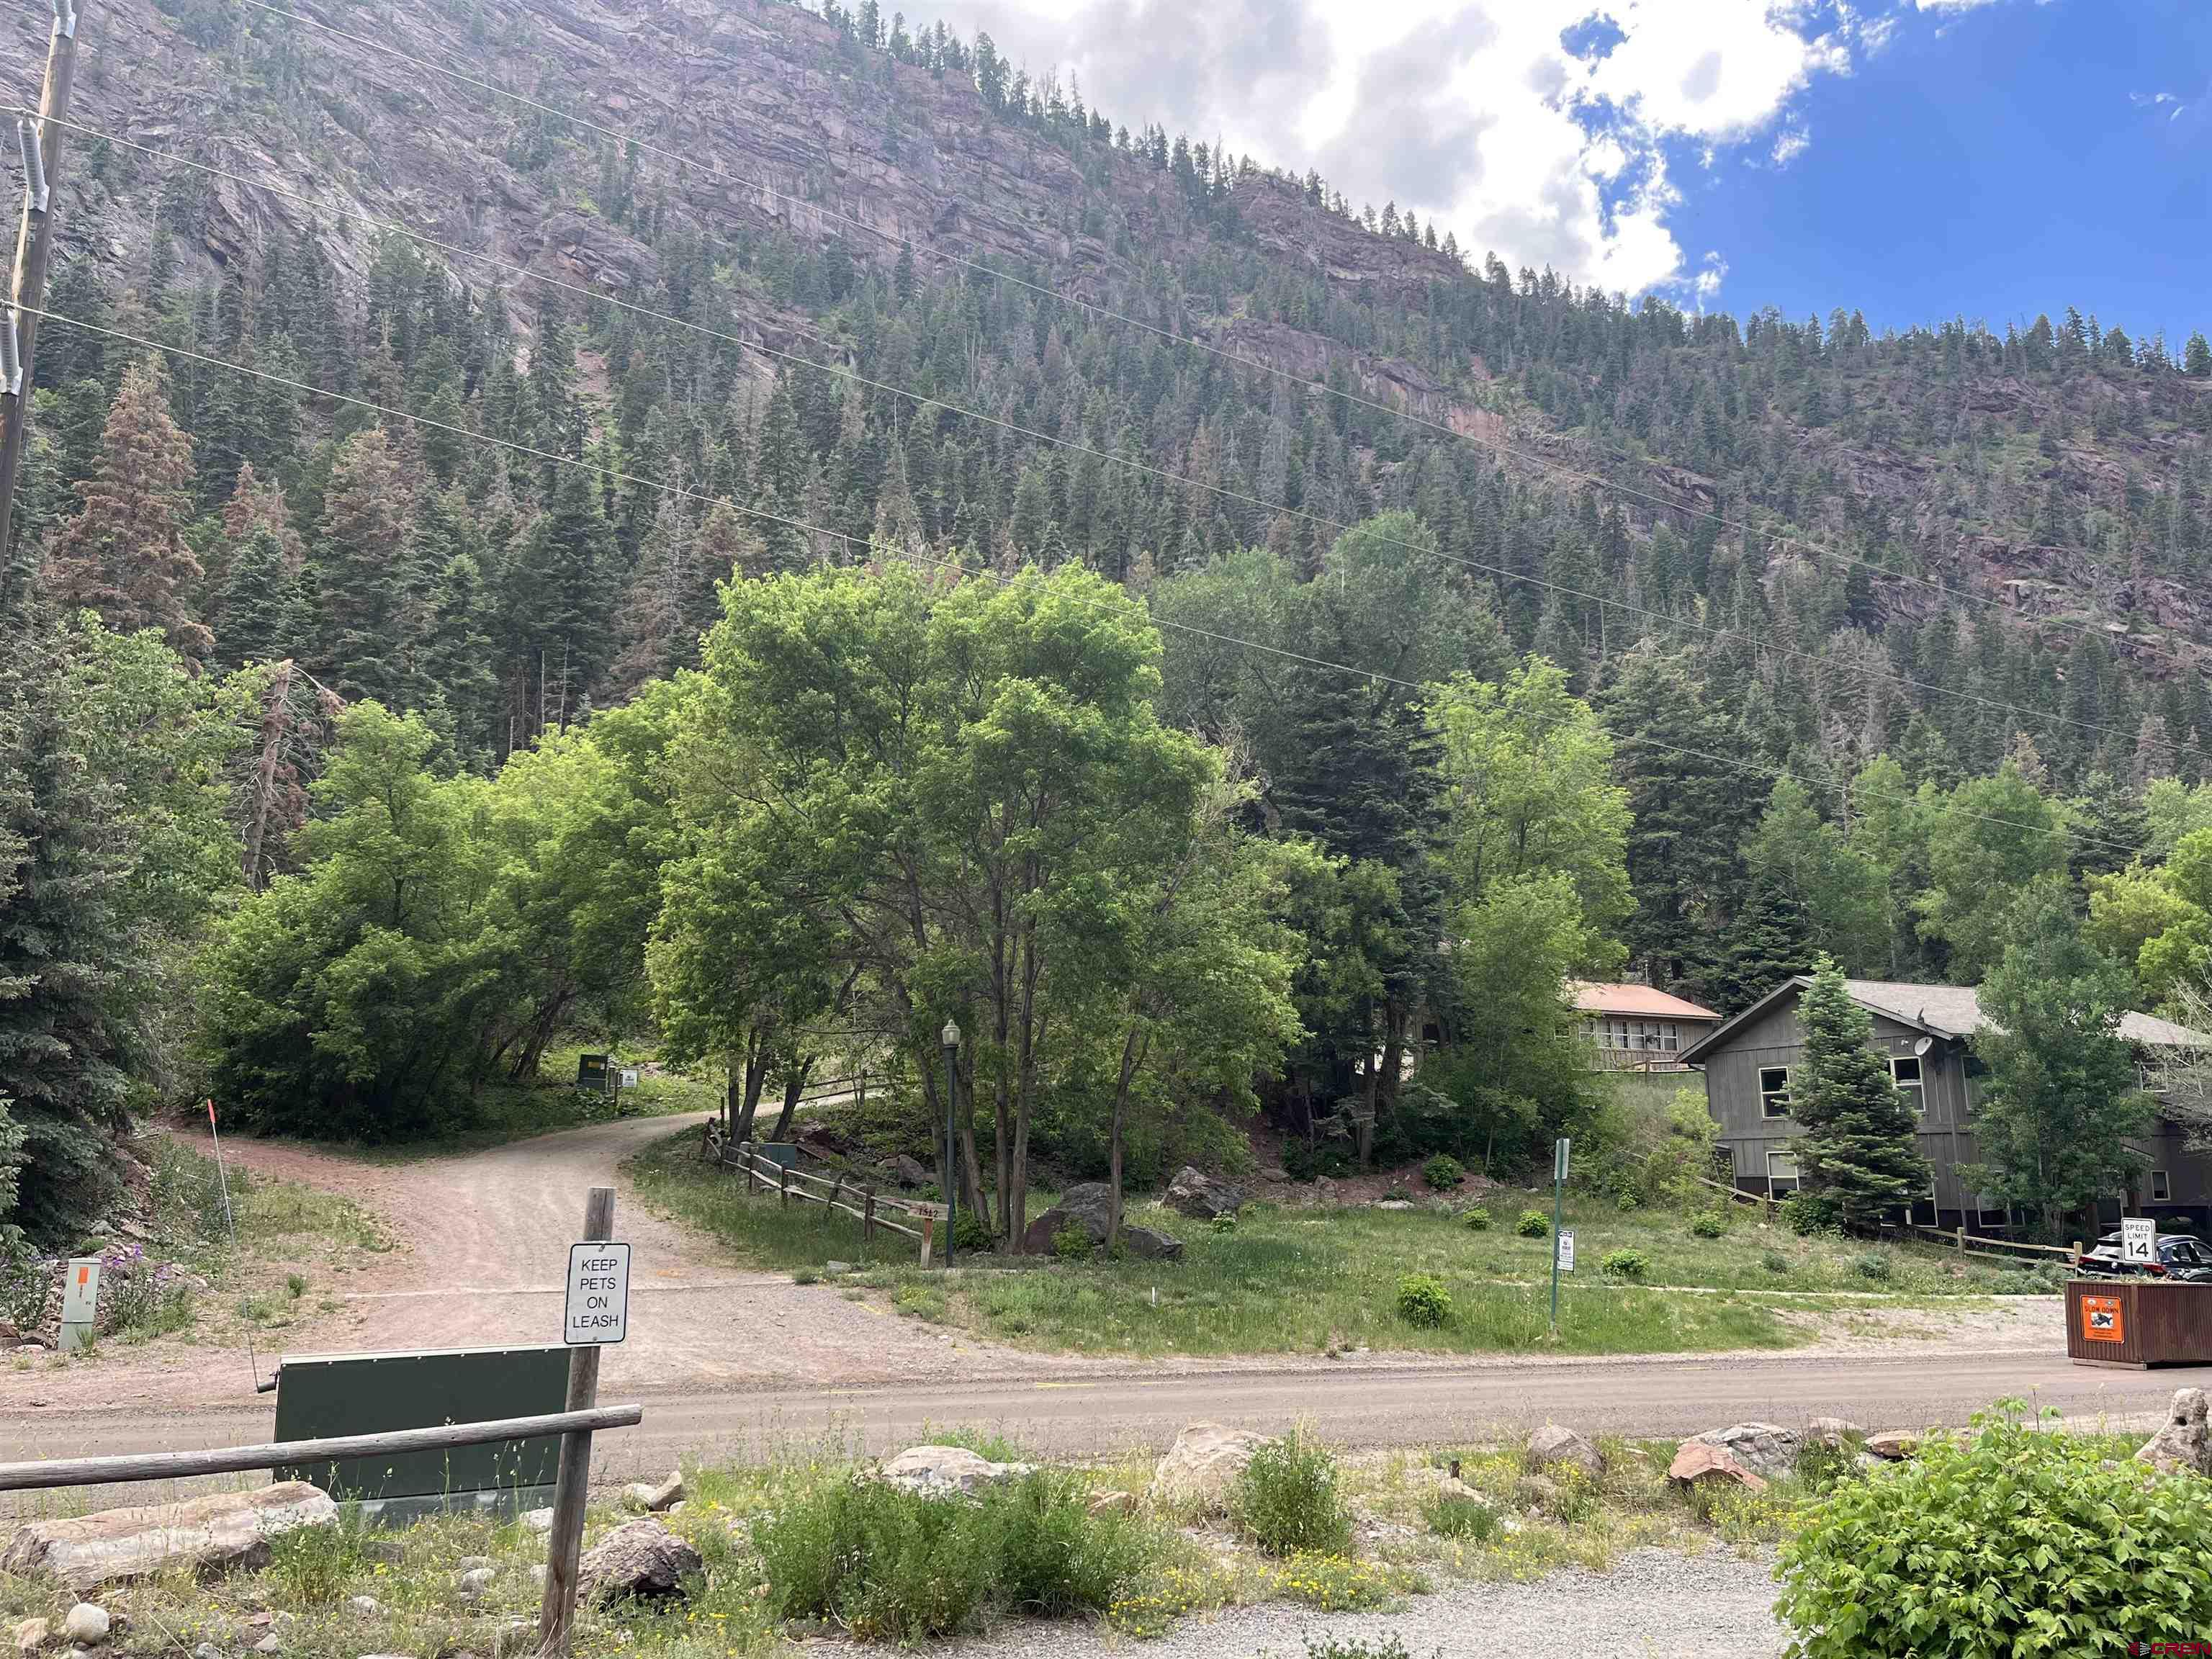 This multi- family zoned building lot is located just outside of the historic town of Ouray. Property is directly across from the Uncompahgre River, and  River Walk Trail, which is a 2-mile loop. This beautiful walking trail is used year-round by the locals. The 180-degree views from this property are over the top amazing. Unobstructed river views as well as Gold Hill directly right in your face. This property is close to town but just far enough away from the busyness of being right in town. All utilities are near the property line, including water, sewer, electric and fiber optics.  Build your dream single family vacation home, duplex or Triplex. Plenty of building options to fit your needs. If not familiar with Ouray, it’s a magical old western town. Once a hidden gem that is now being loved by many vacationers and tourists. Not many building parcels left in Ouray. Don’t hesitate and give this property a look. You won’t be disappointed in the location, views and neighborhood around it.